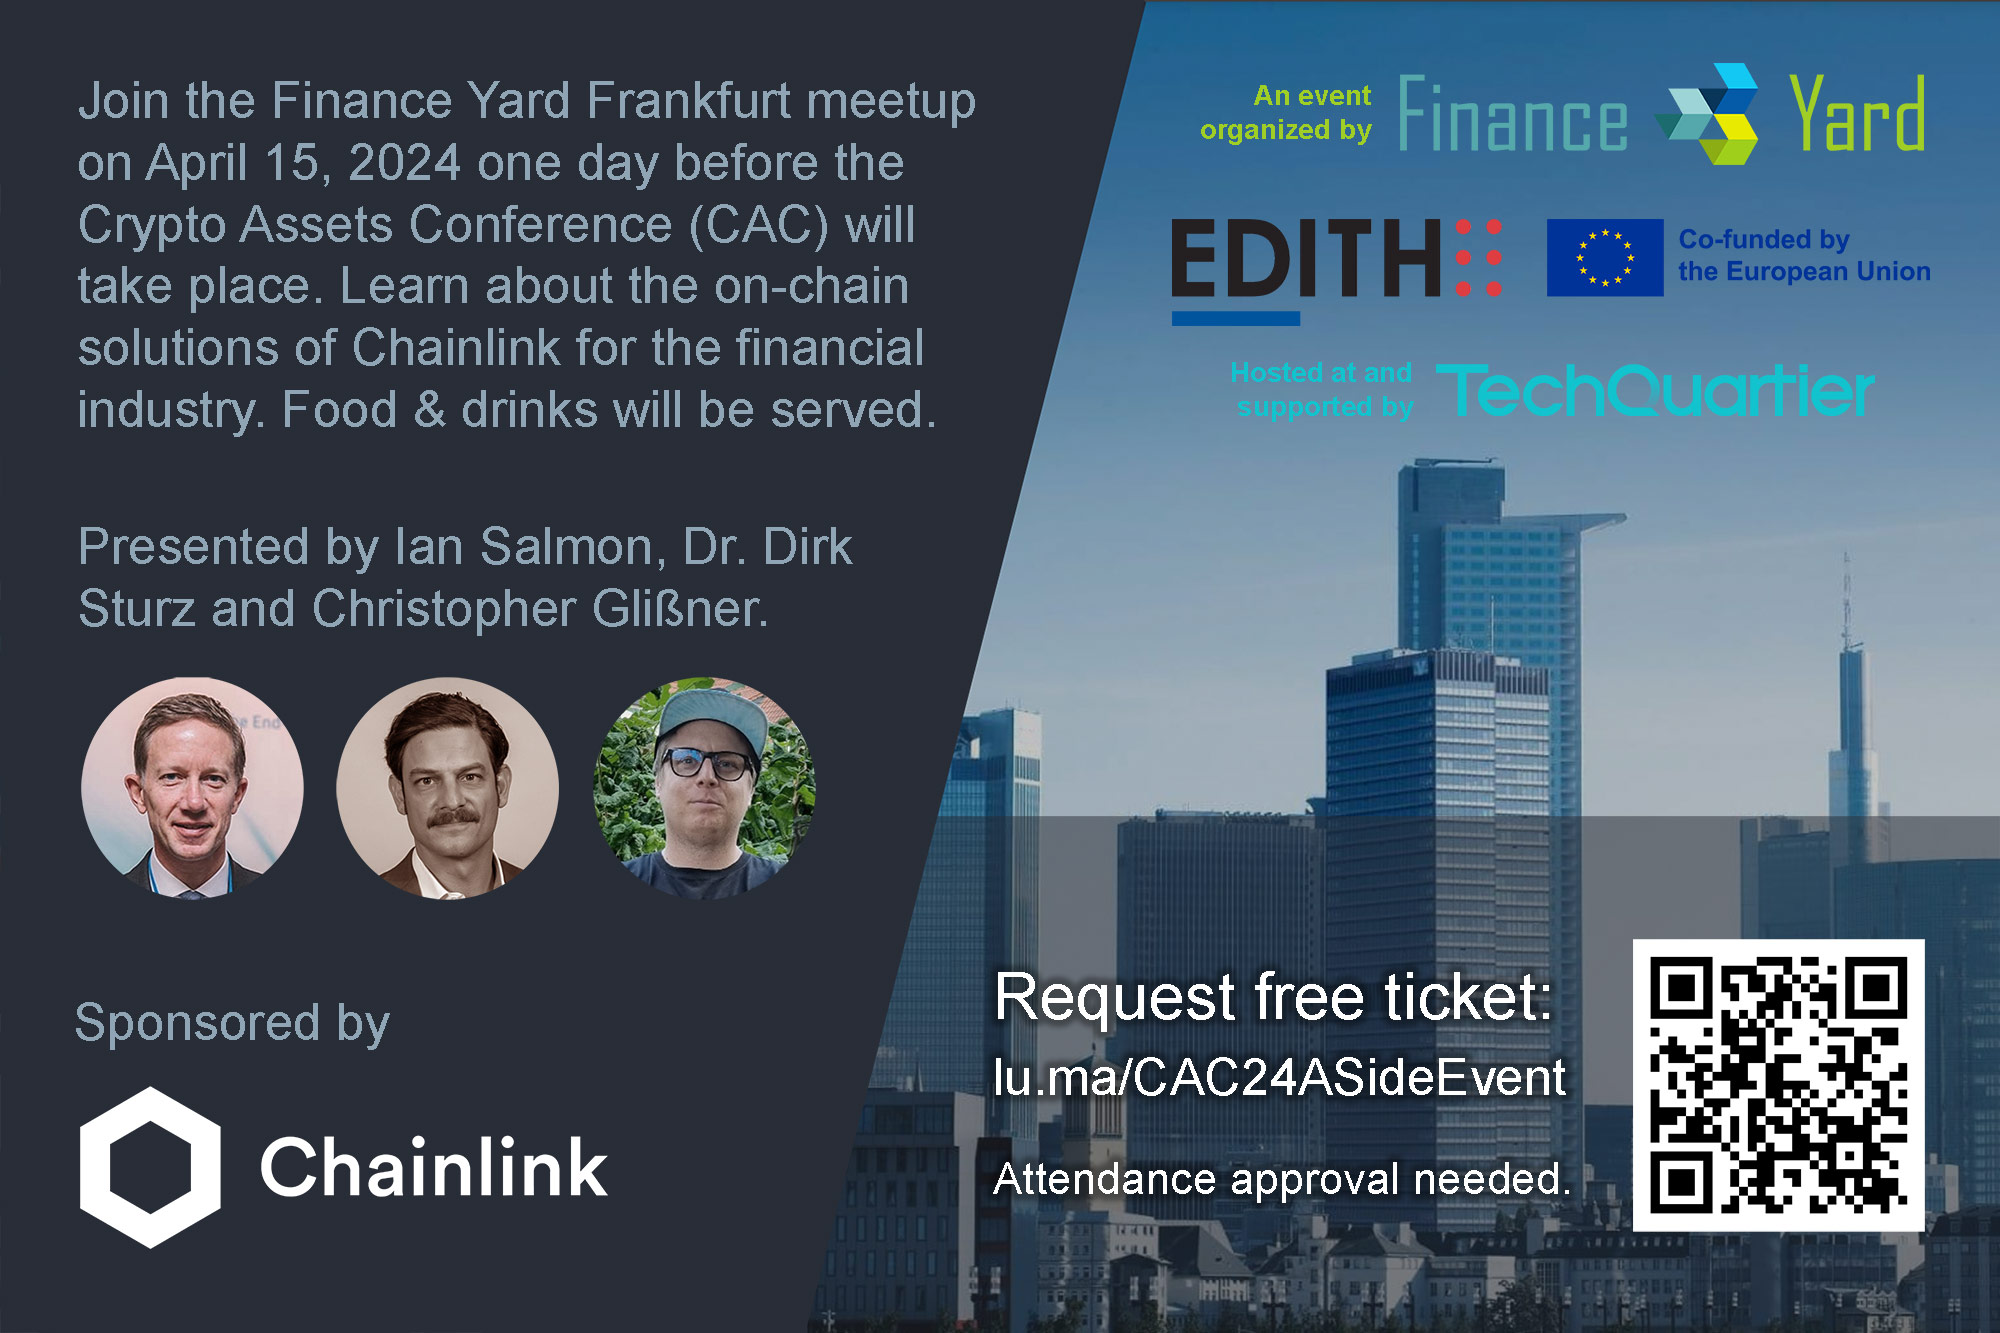 CAC Frankfurt - Crypto Assets Conference Frankfurt am Main - CAC side event - Chainlink Labs - CAC Side Event in Frankfurt, Germany - April 2024 - Finance Yard